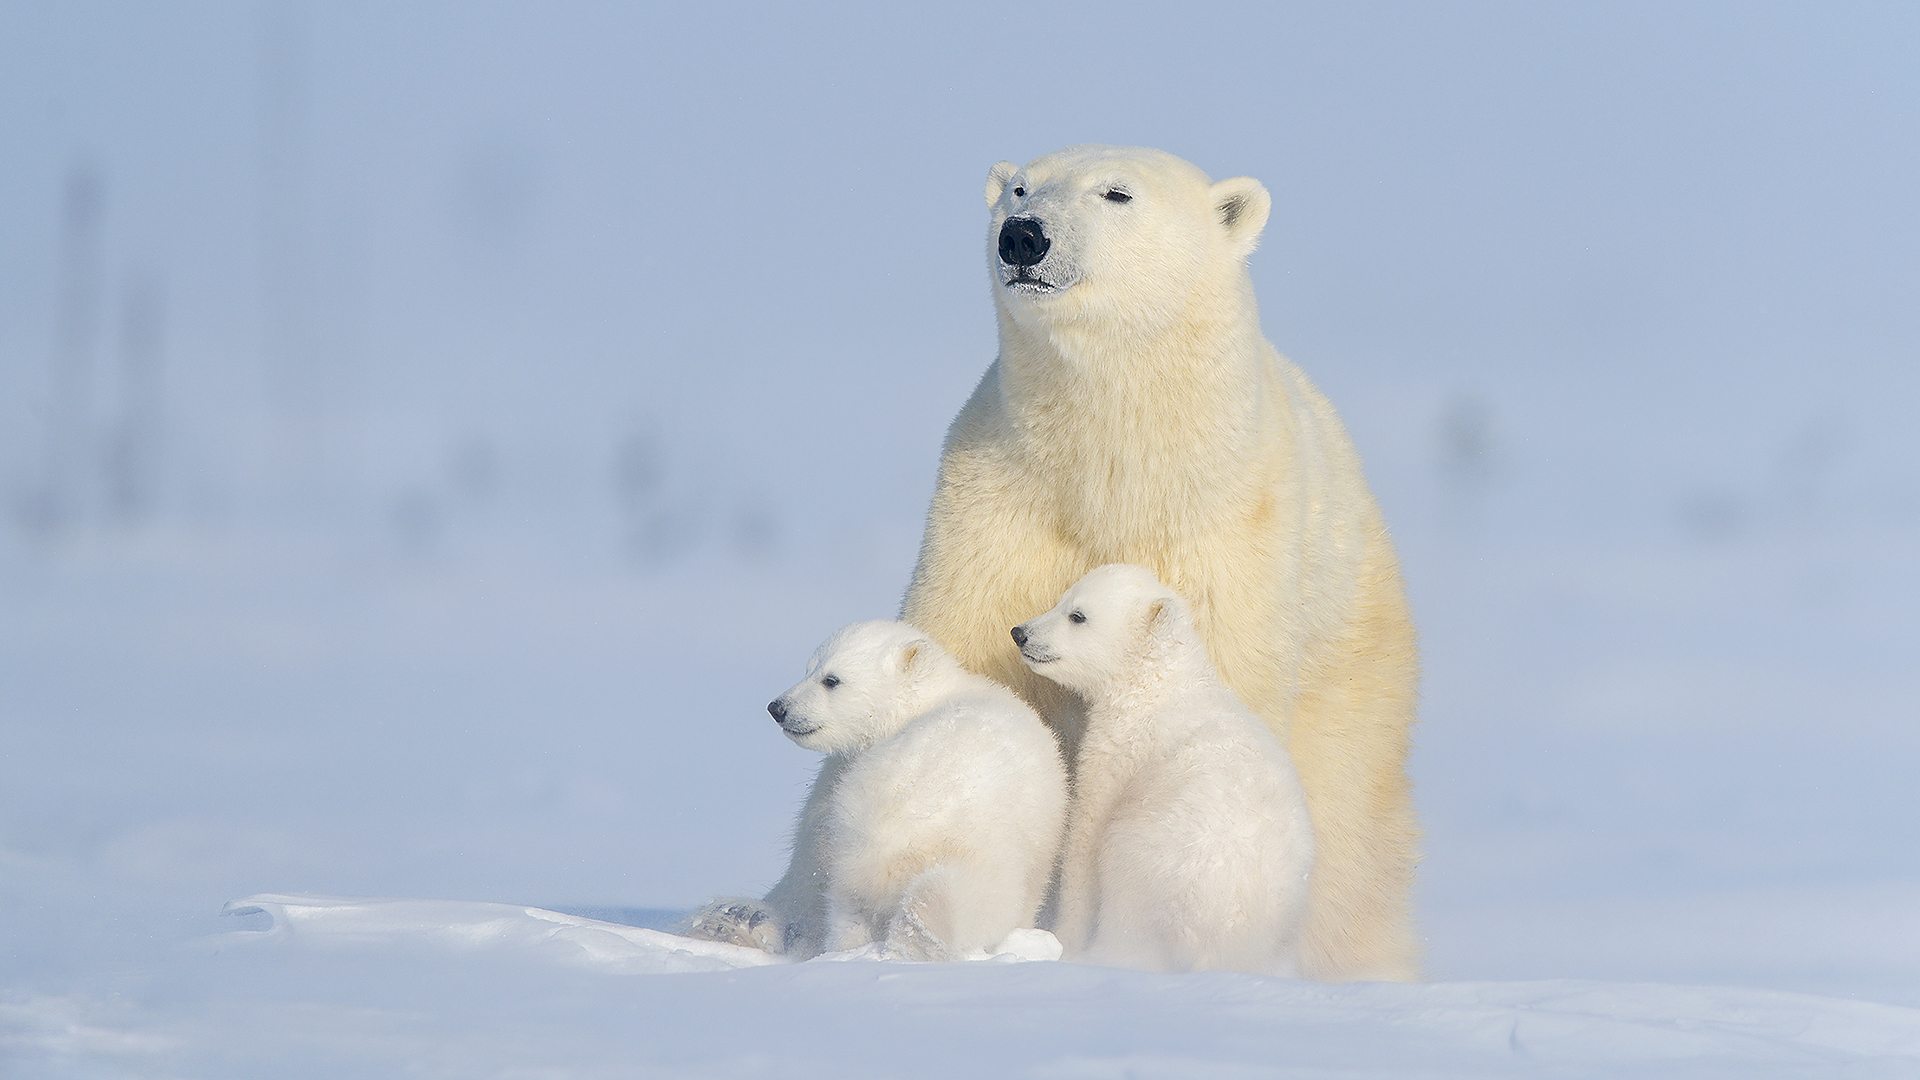 Polar bear with cubs in the Arctic (Credit: Getty Images)